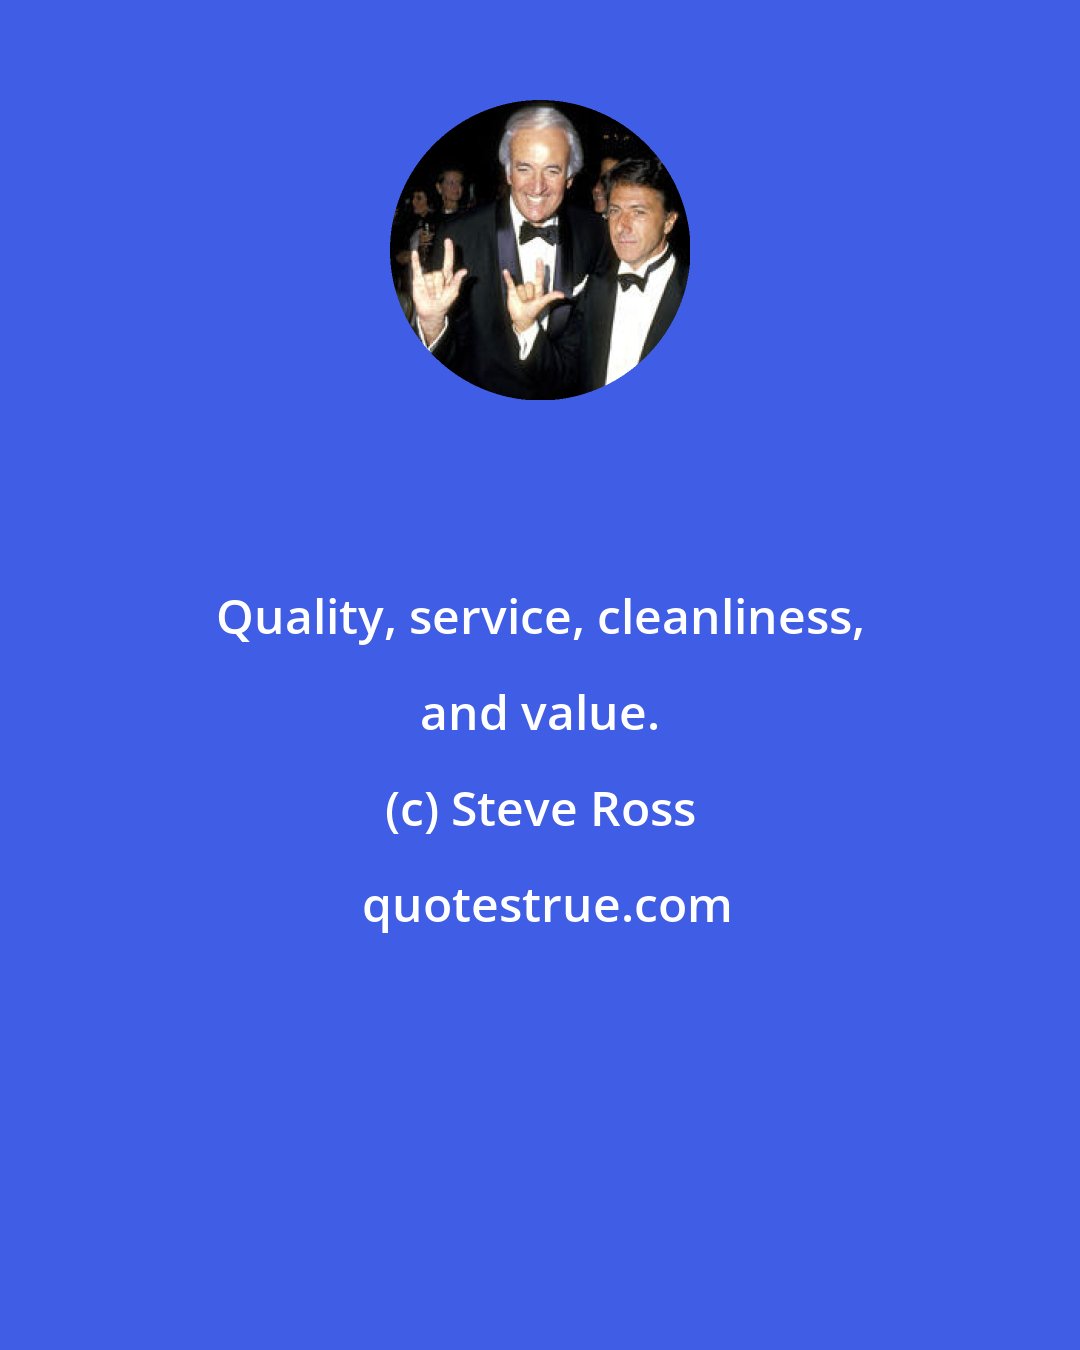 Steve Ross: Quality, service, cleanliness, and value.